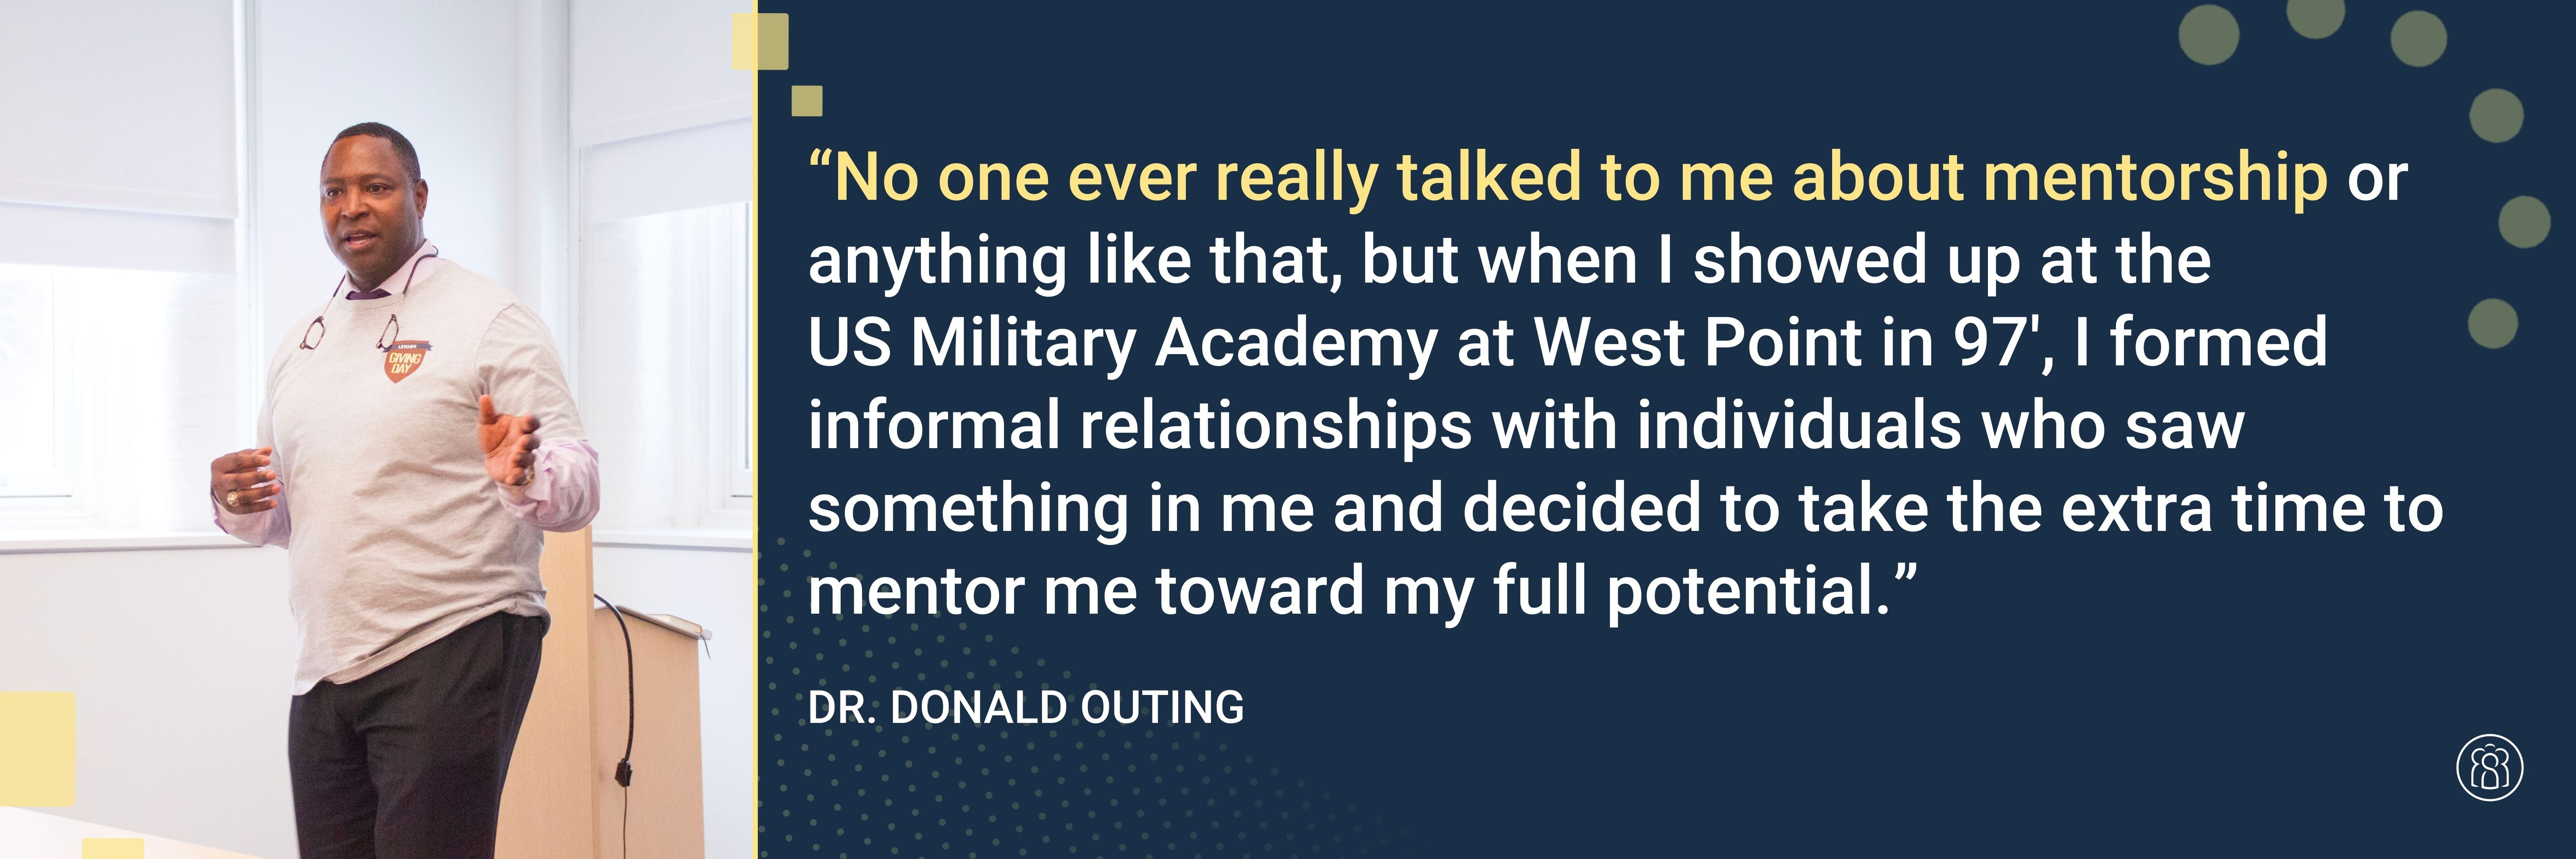 Donald Outing_West Point Mentorship